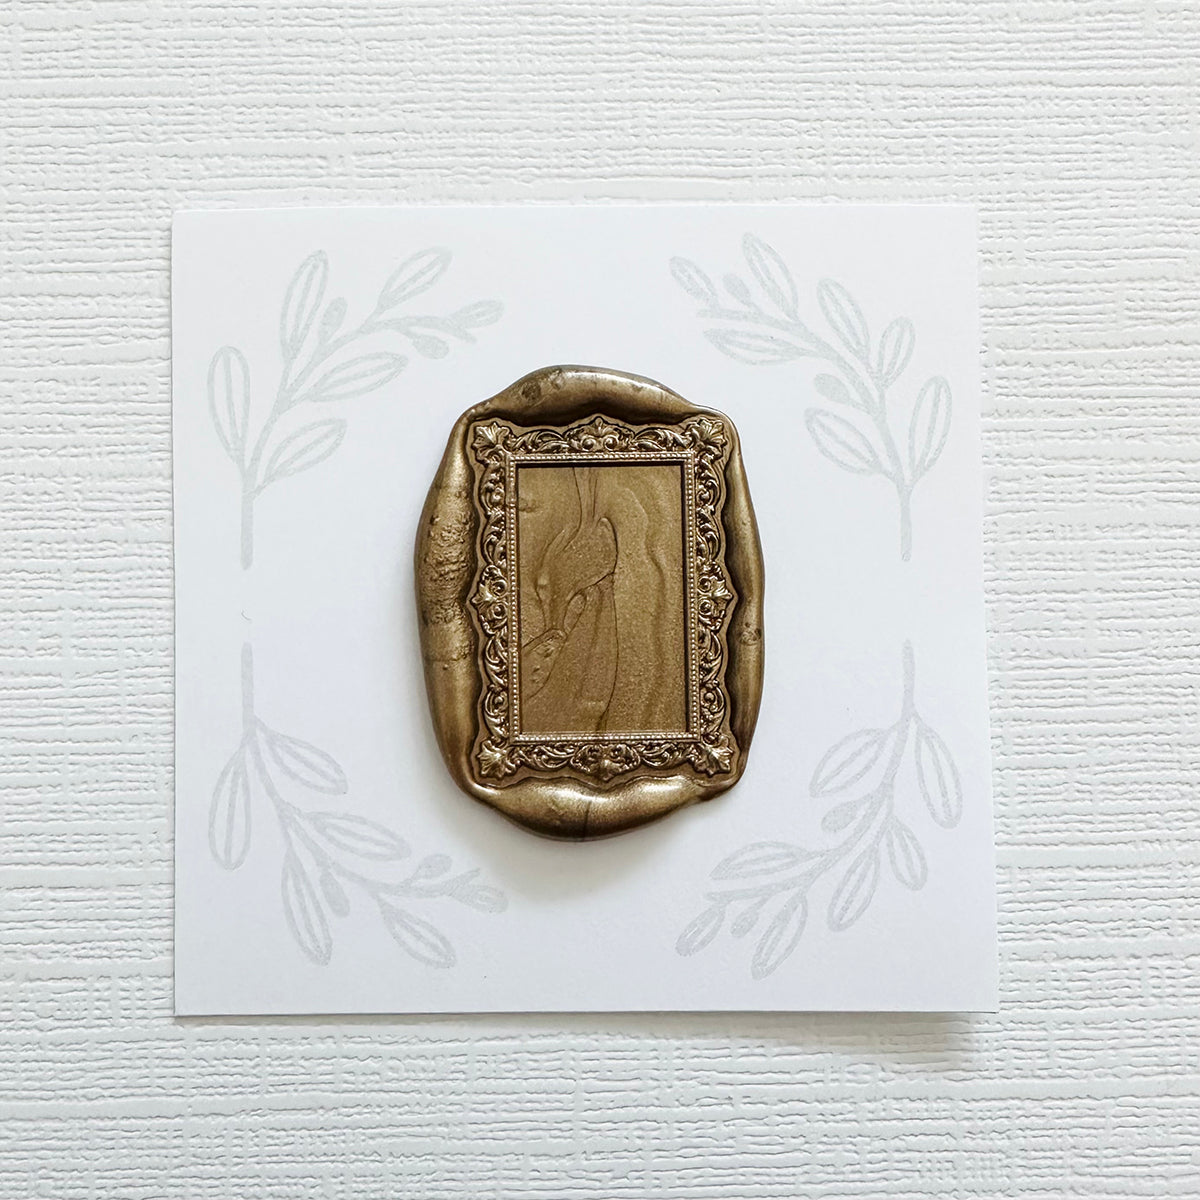 Frame No. 1 Wax Seal Stamp